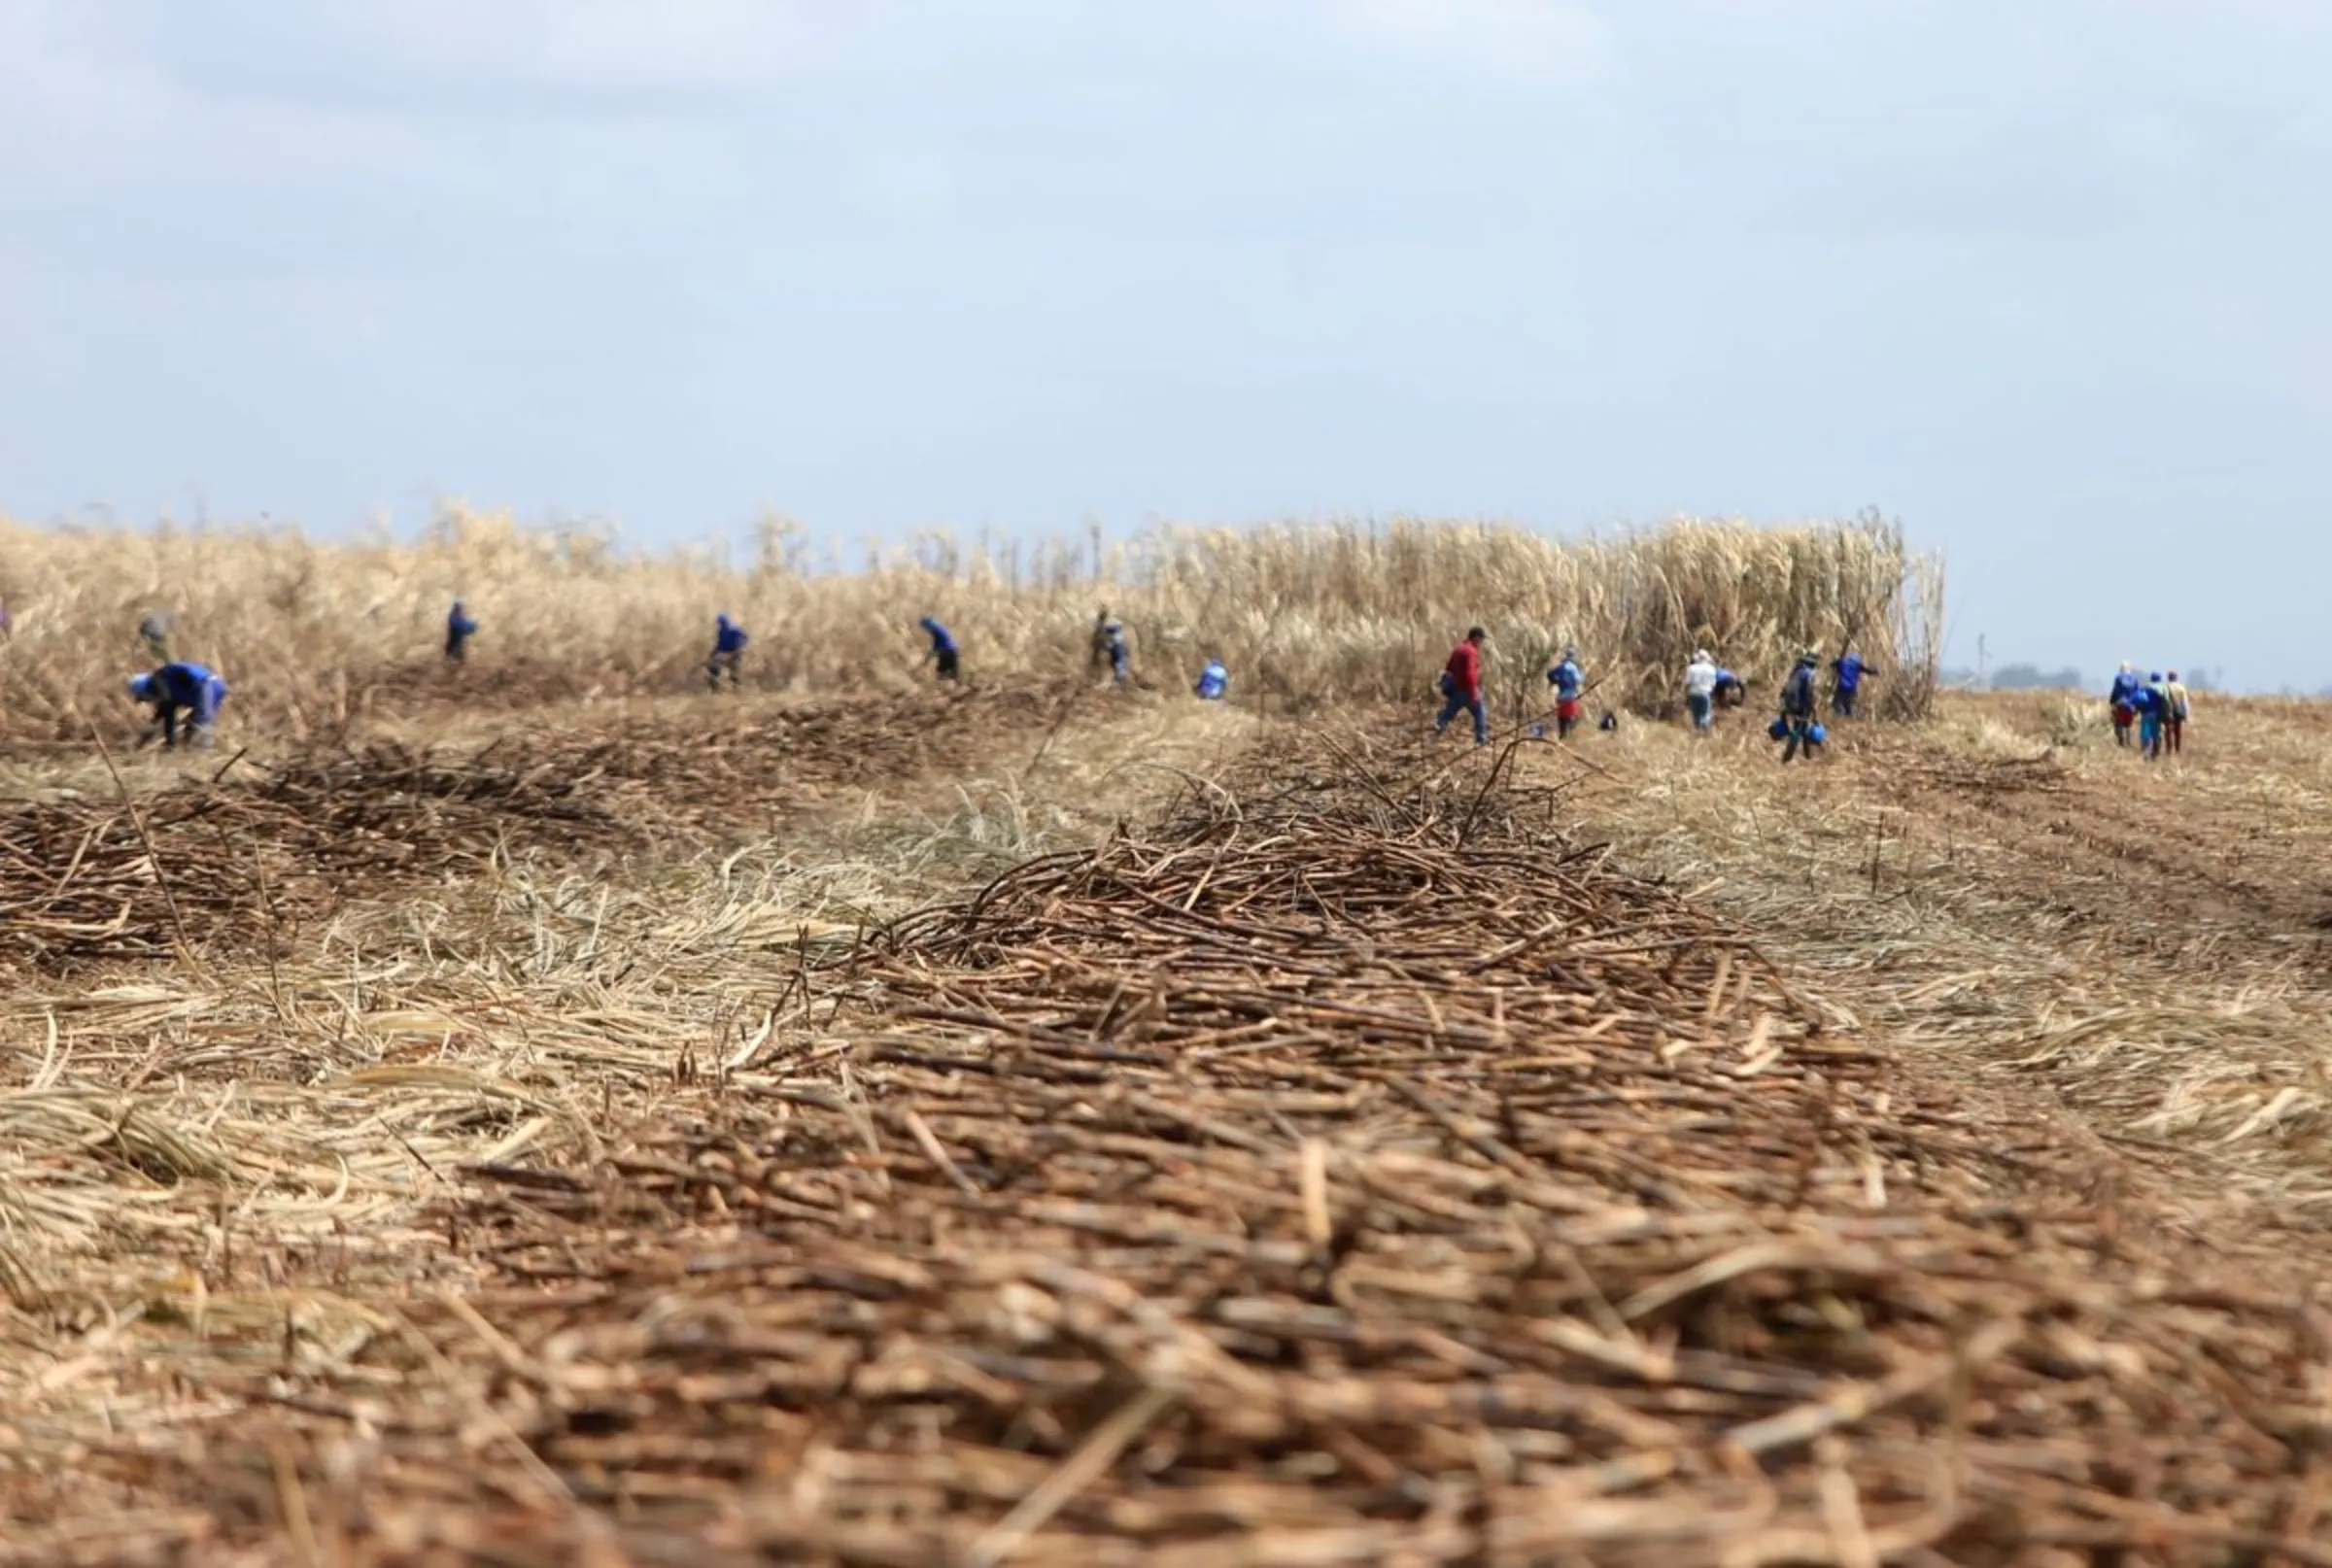 Sugarcane is harvested by workers in a plantation near Maceio, Brazil, on September 27, 2021